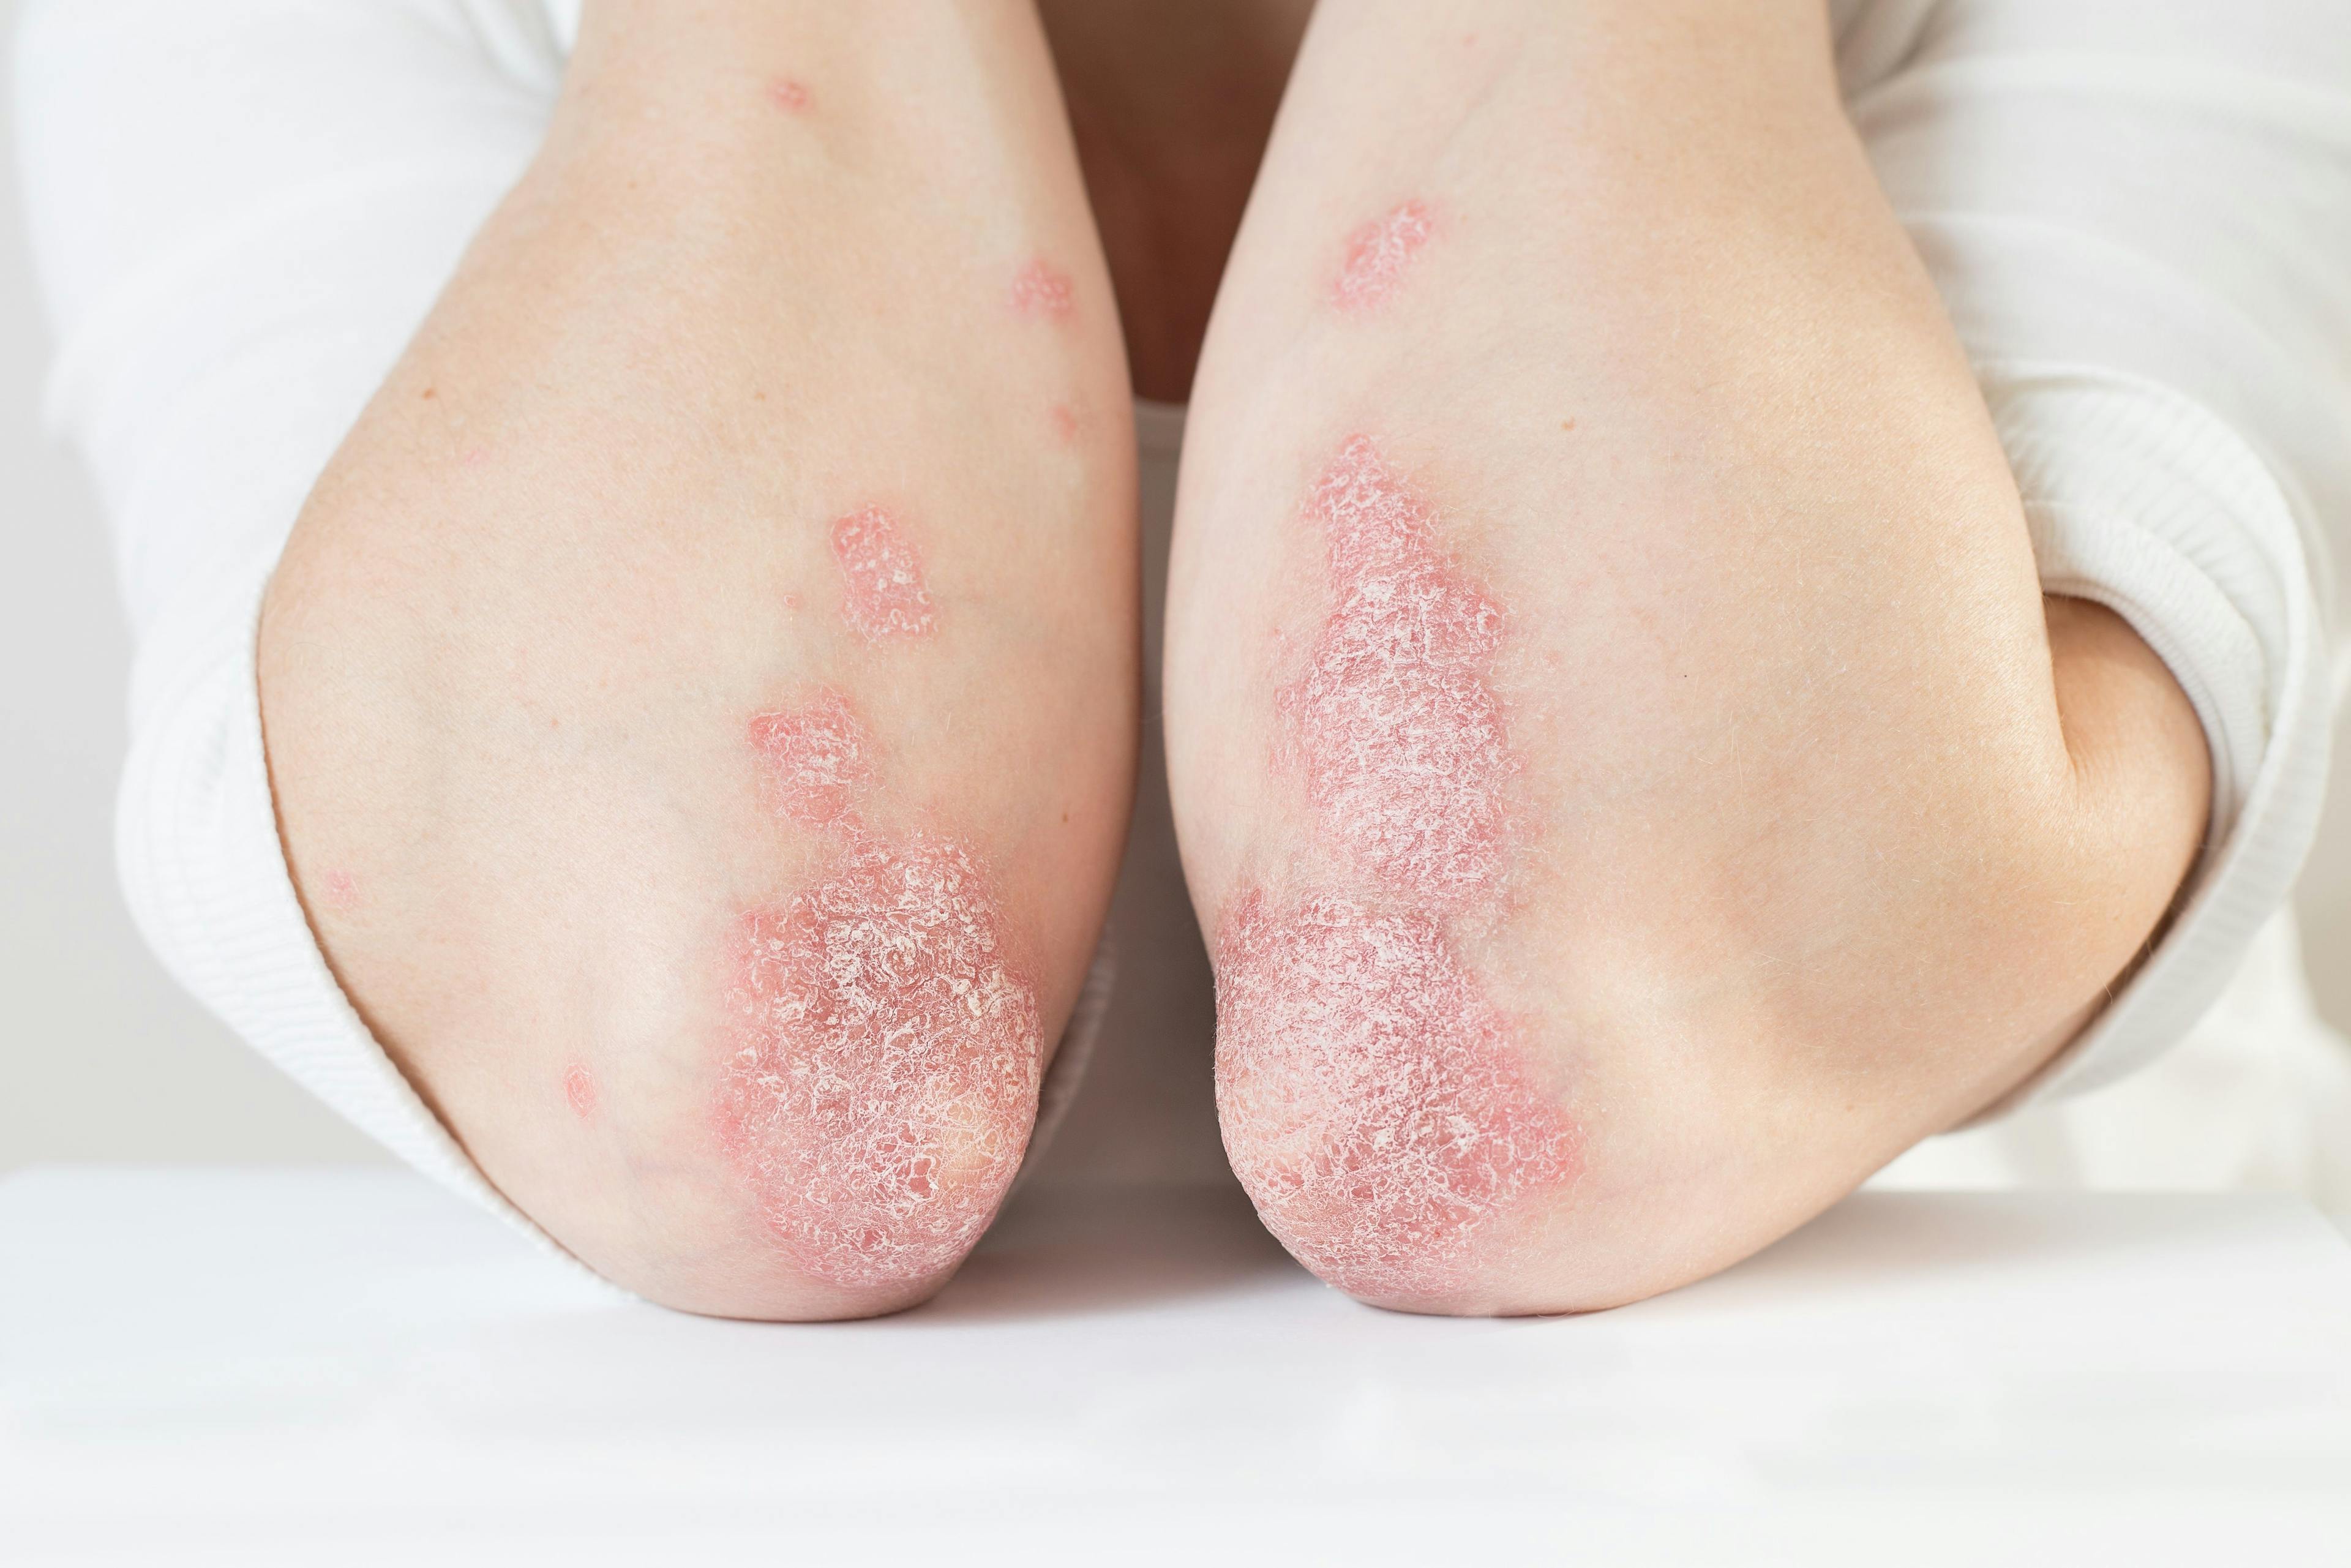 Acute psoriasis on the elbows is an autoimmune incurable dermatological skin disease. Large red, inflamed, flaky rash on the knees. Joints affected by psoriatic arthritis | Image Credit: SNAB - stock.adobe.com